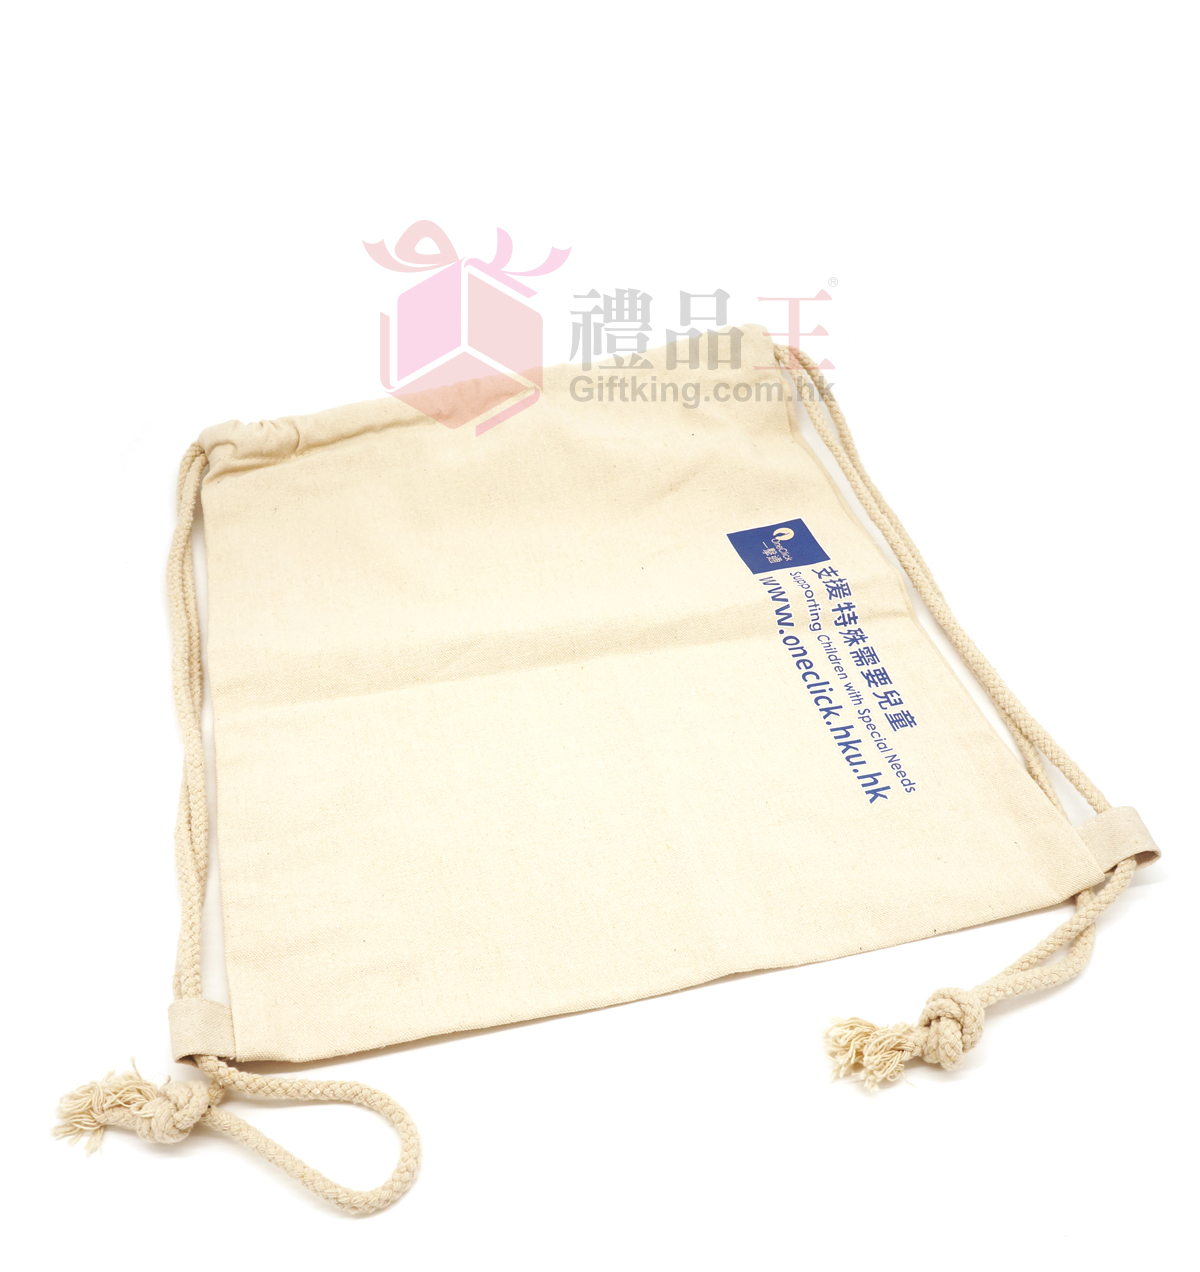 Oneclick Canvas Rope Bag ( Clothing gift)